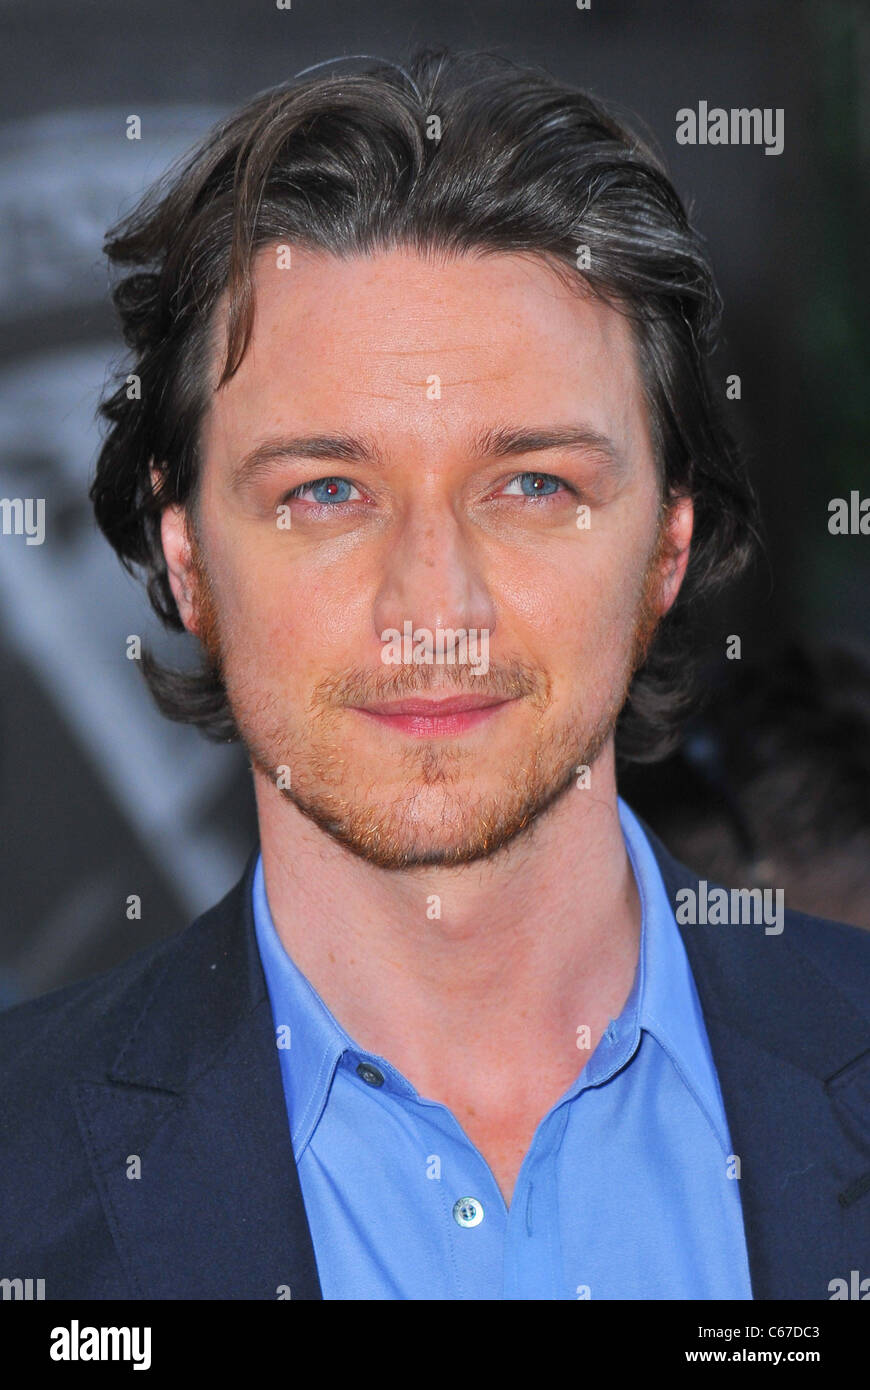 James McAvoy at arrivals for X-MEN: FIRST CLASS Premiere, The Ziegfeld Theatre, New York, NY May 25, 2011. Photo By: Gregorio T. Binuya/Everett Collection Stock Photo